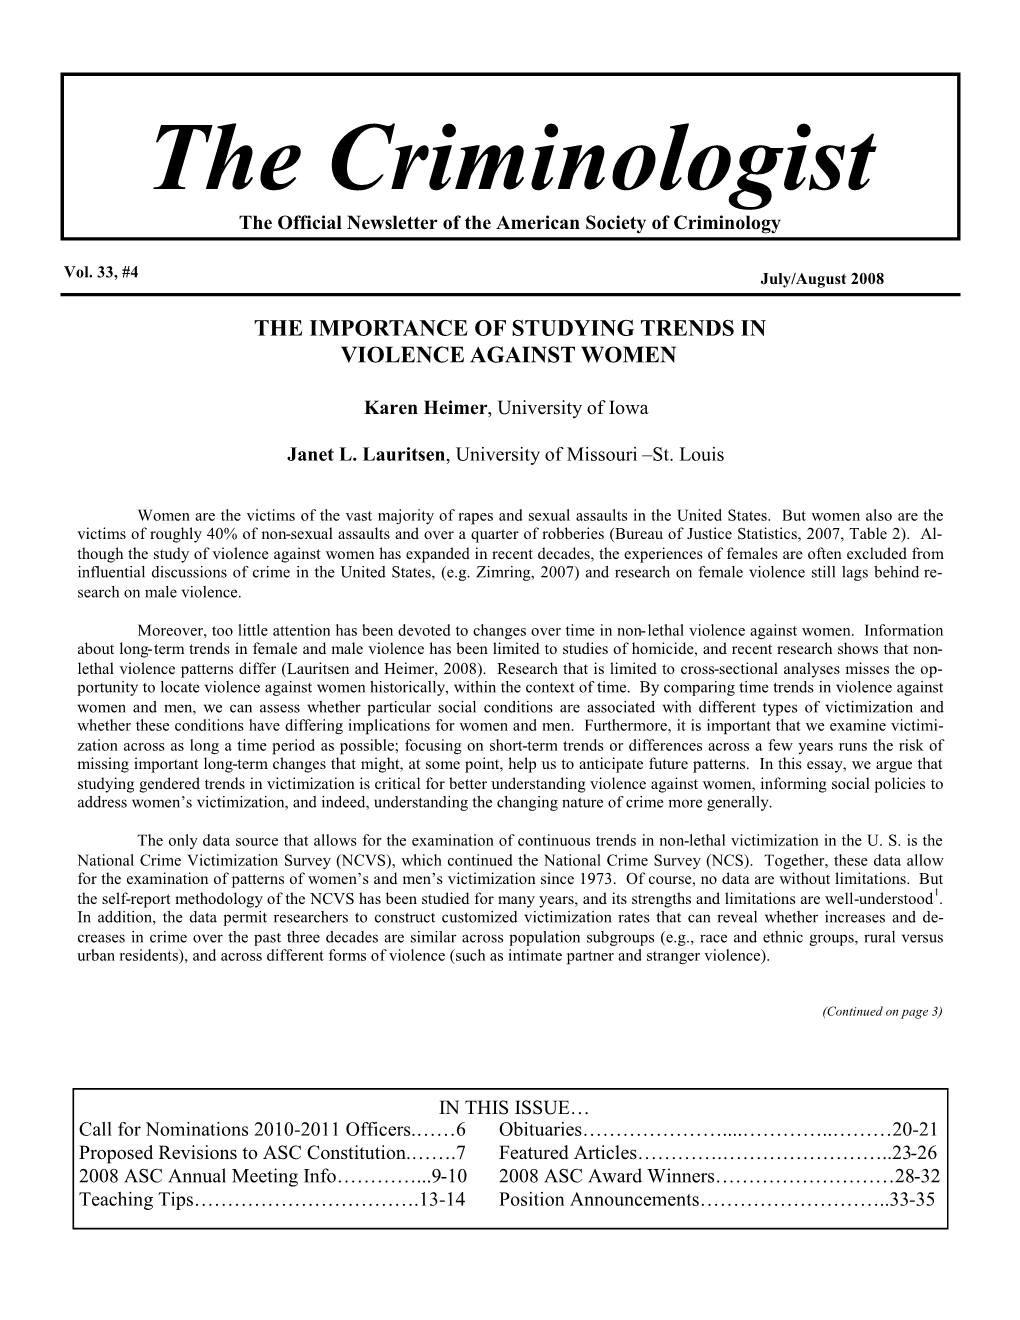 The Criminologist Page 1 the Criminologist the Official Newsletter of the American Society of Criminology